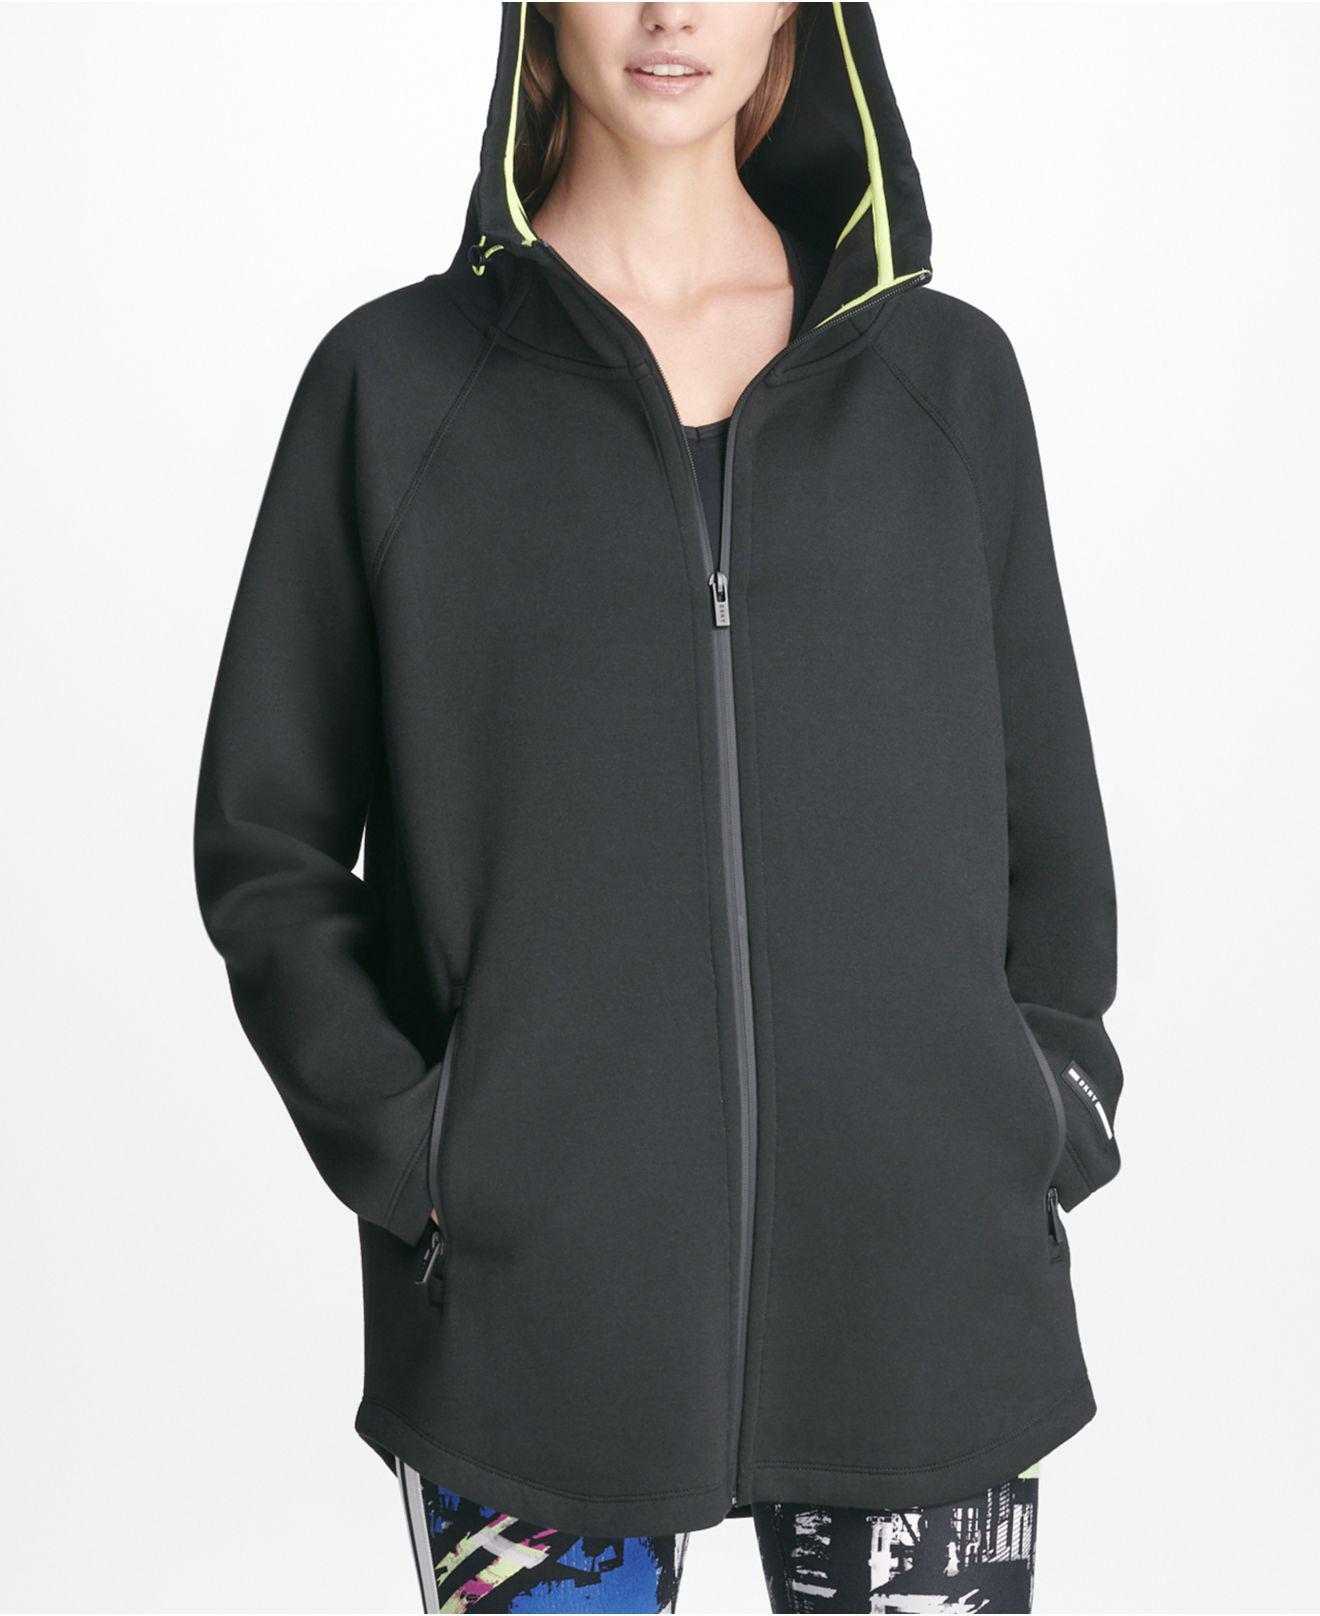 Download DKNY Synthetic Colorblocked Zip-front Hoodie in Black - Lyst